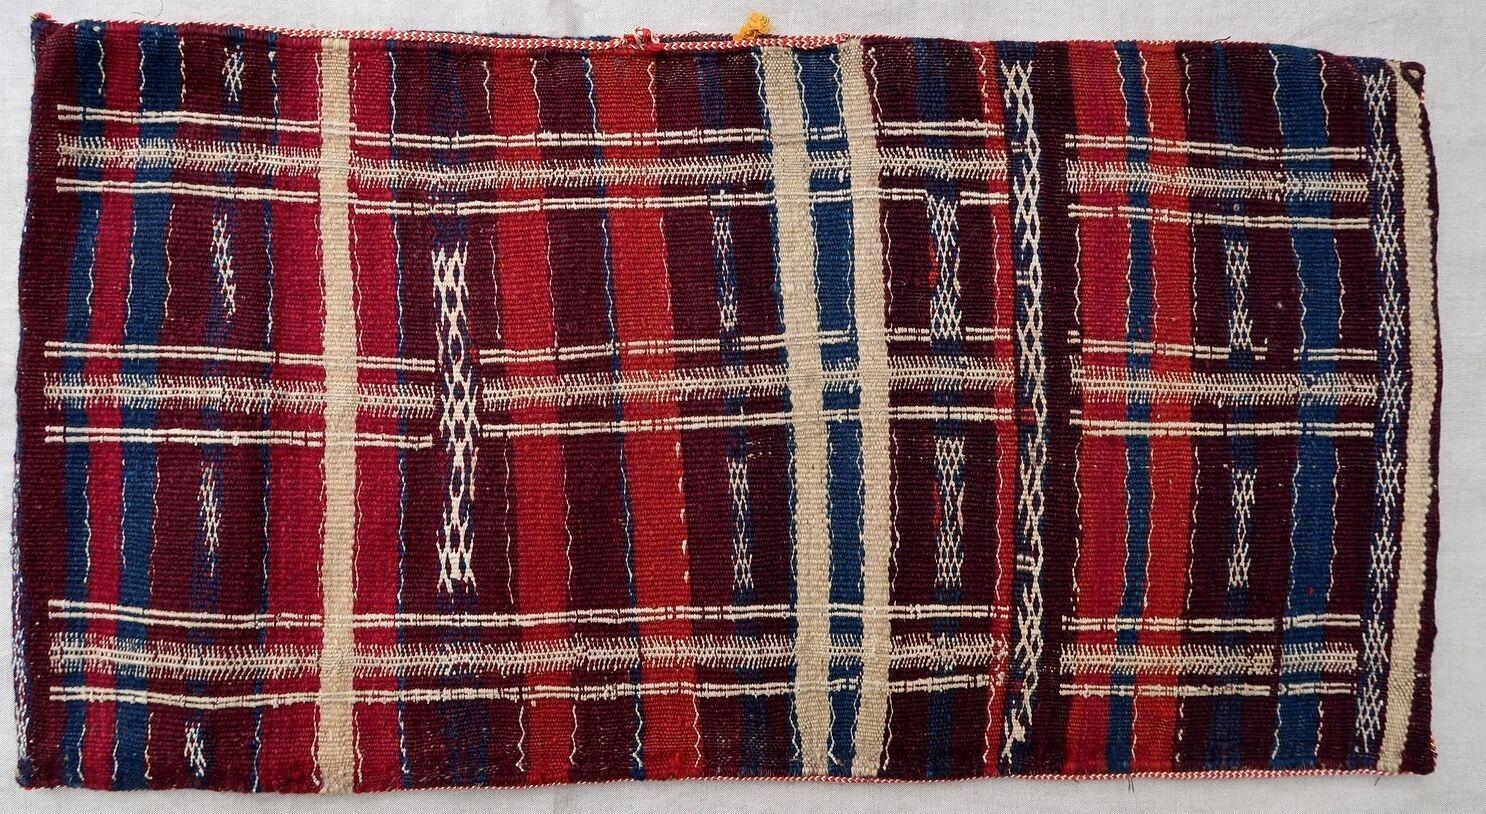 Handmade vintage Moroccan Berber cushion made out of vintage kilim. The flat-weave is from the mid-20th century, it is in original good condition. 

- Condition: original good,

- circa: 1950s,

- Size: 1.4' x 2.7' (43cm x 83cm),

-